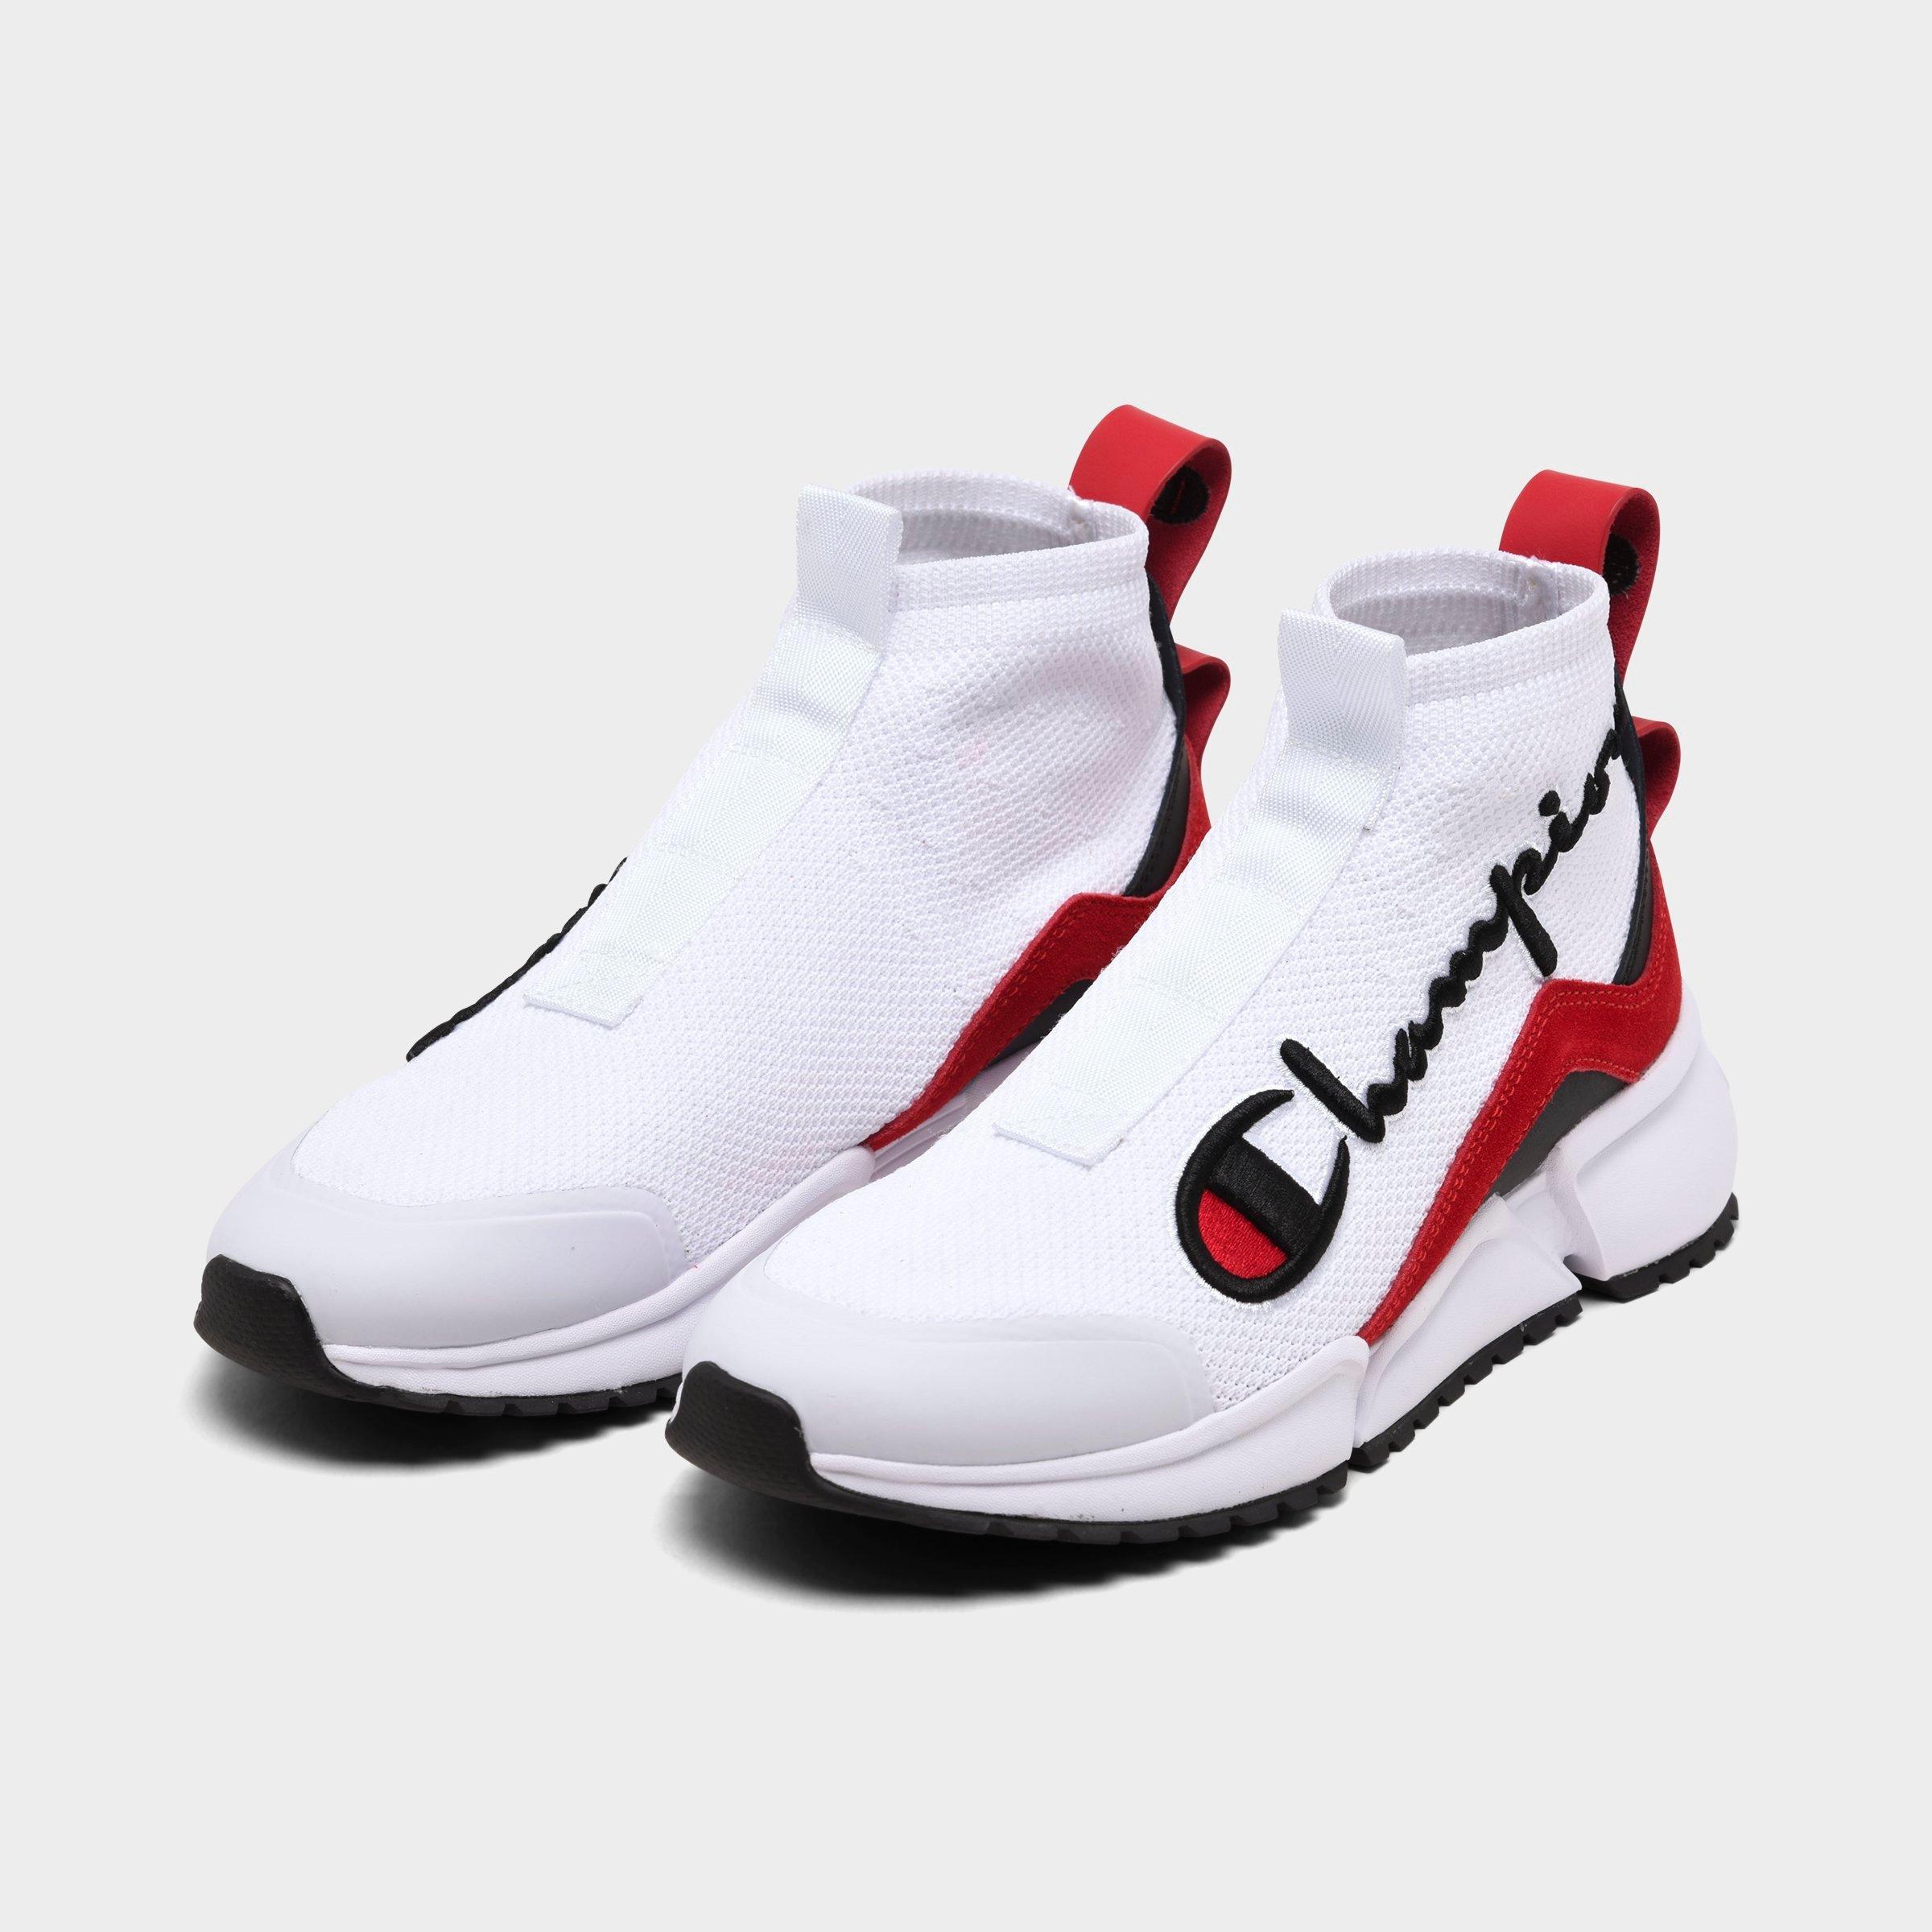 white and black champion shoes